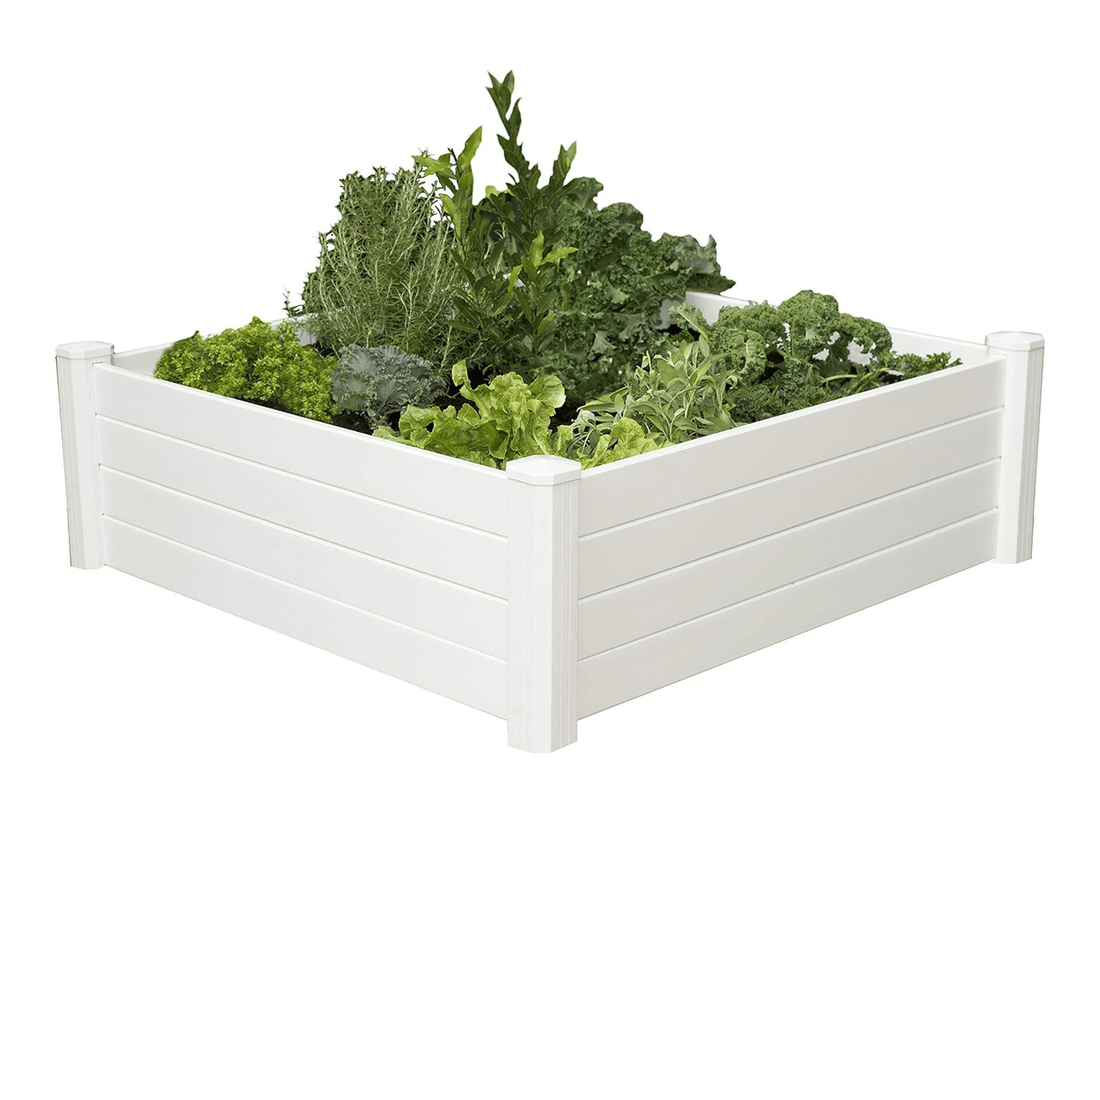 Horti Cubic 4'x4'x11 Resin Garden Bed with Grow Grid - Horti Cubic